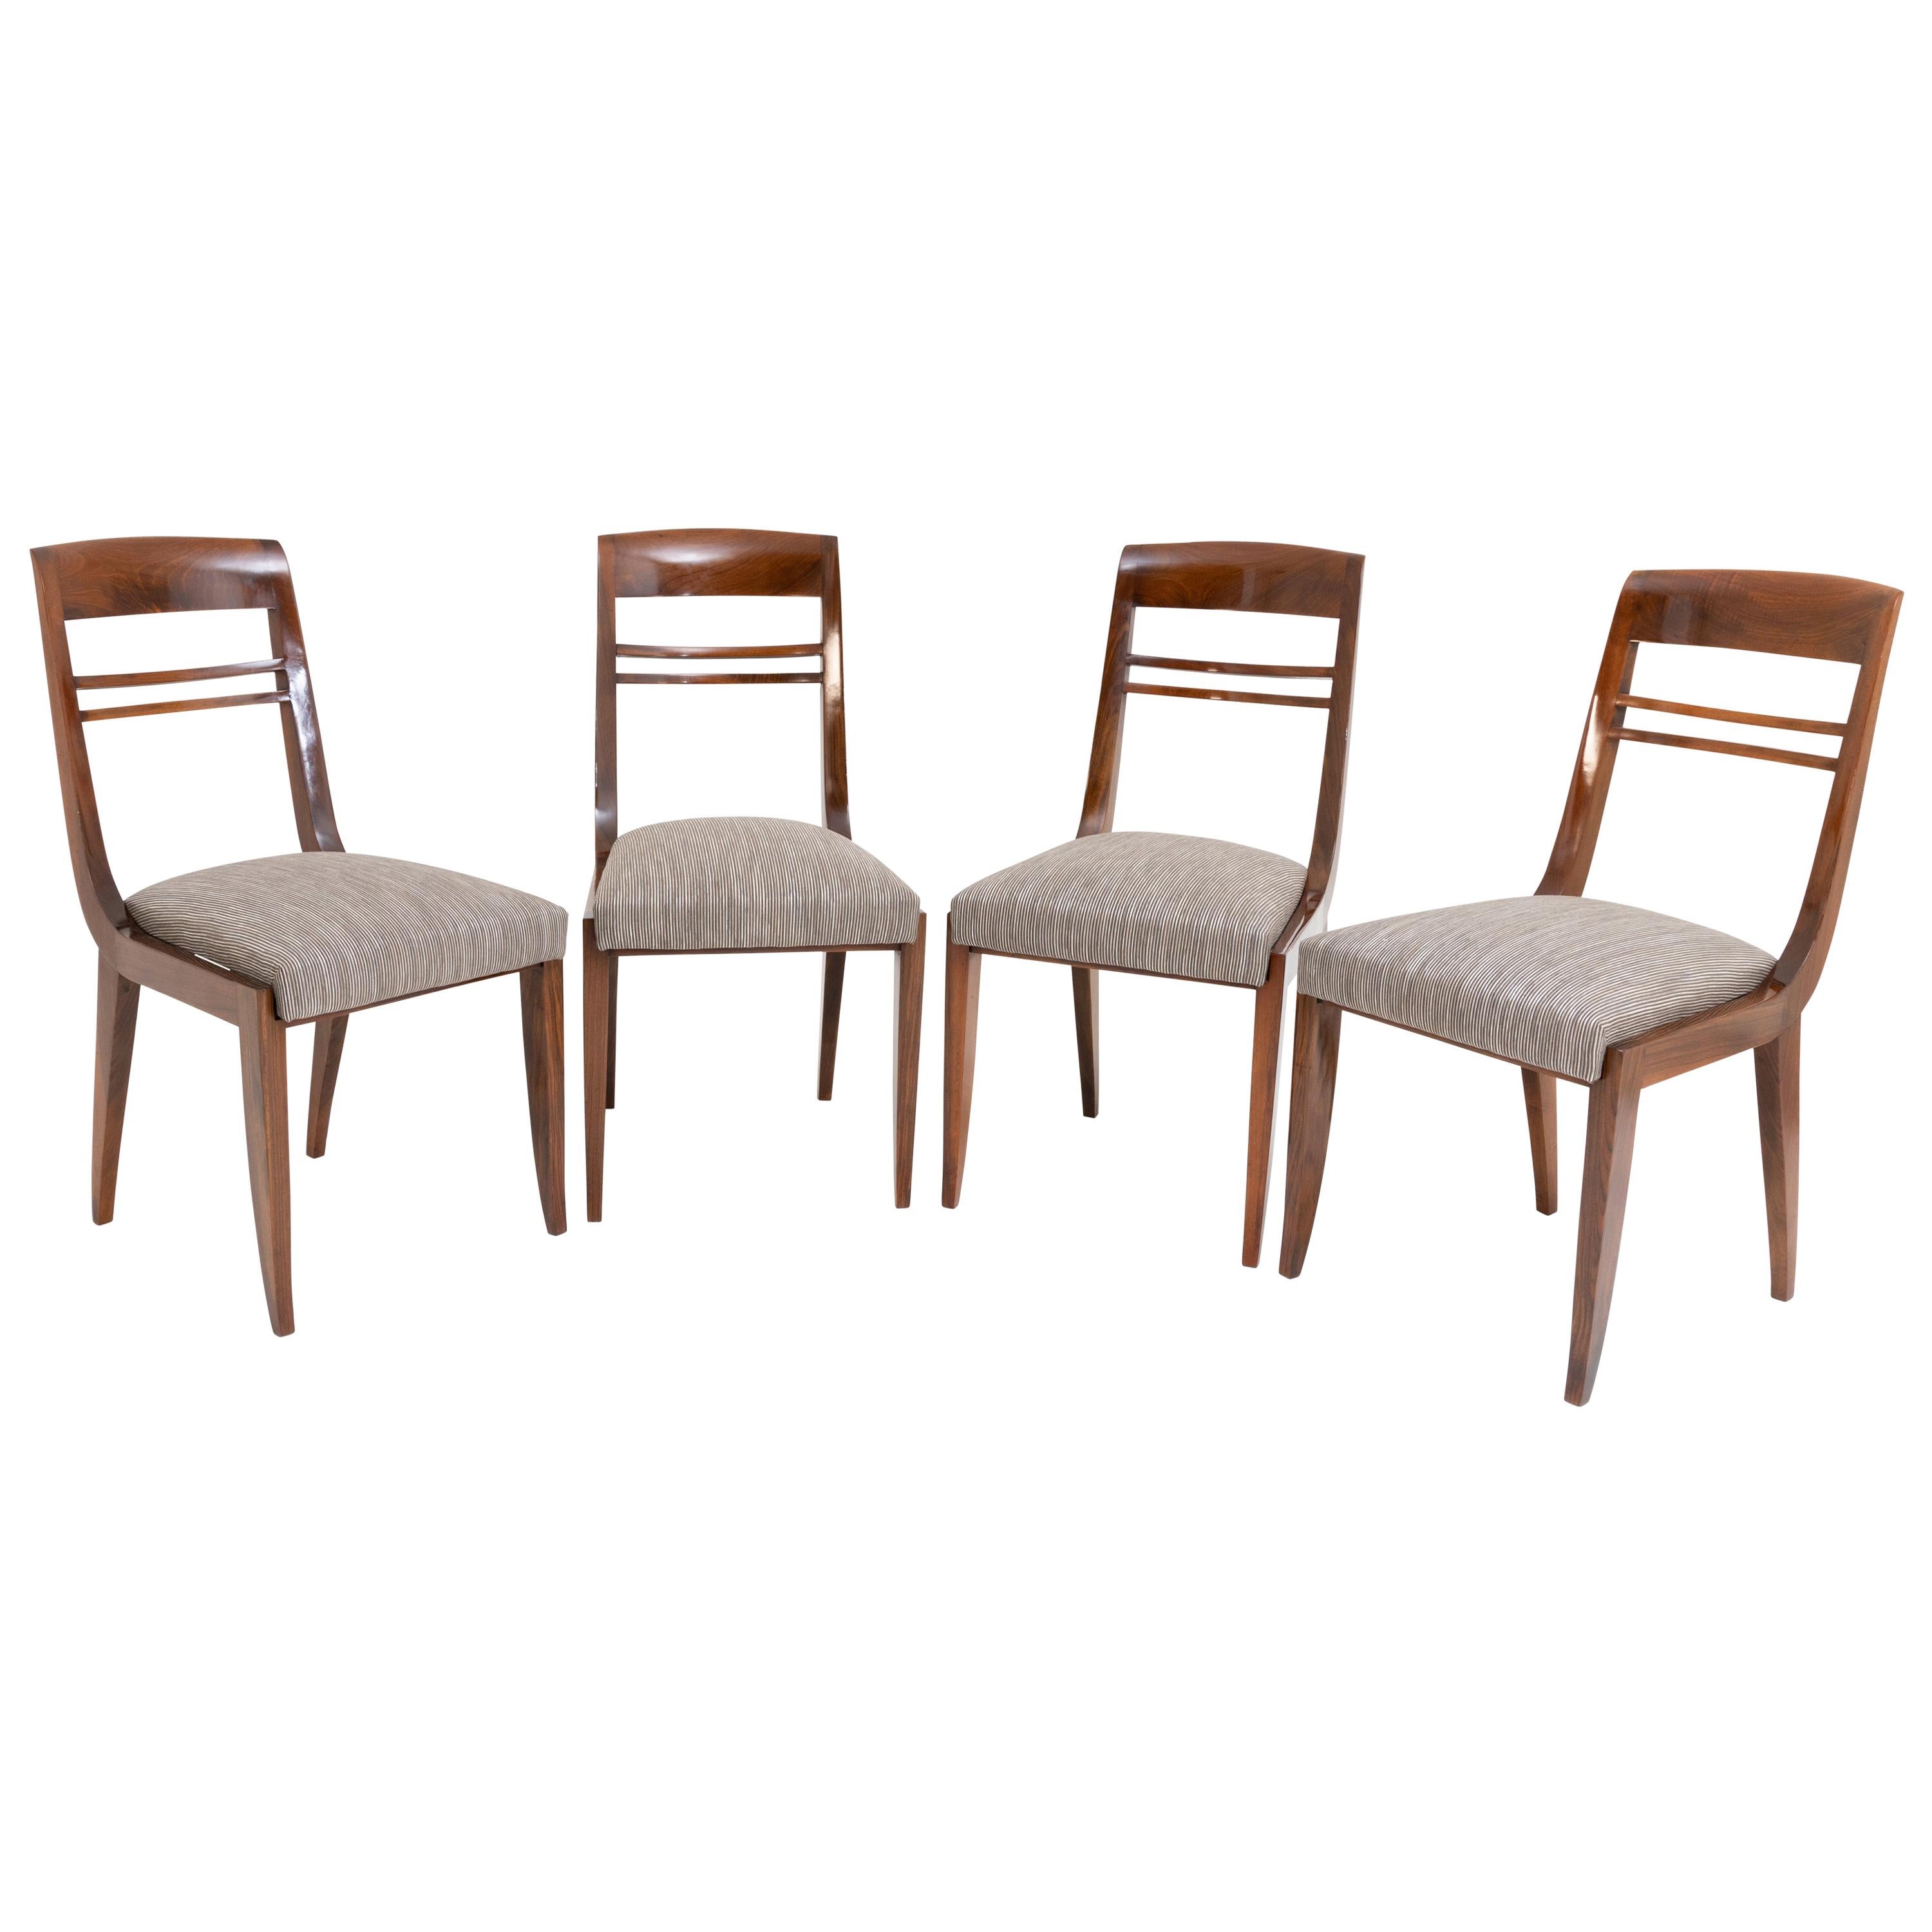 Set of Four Art Deco Chairs, Probably France, circa 1920